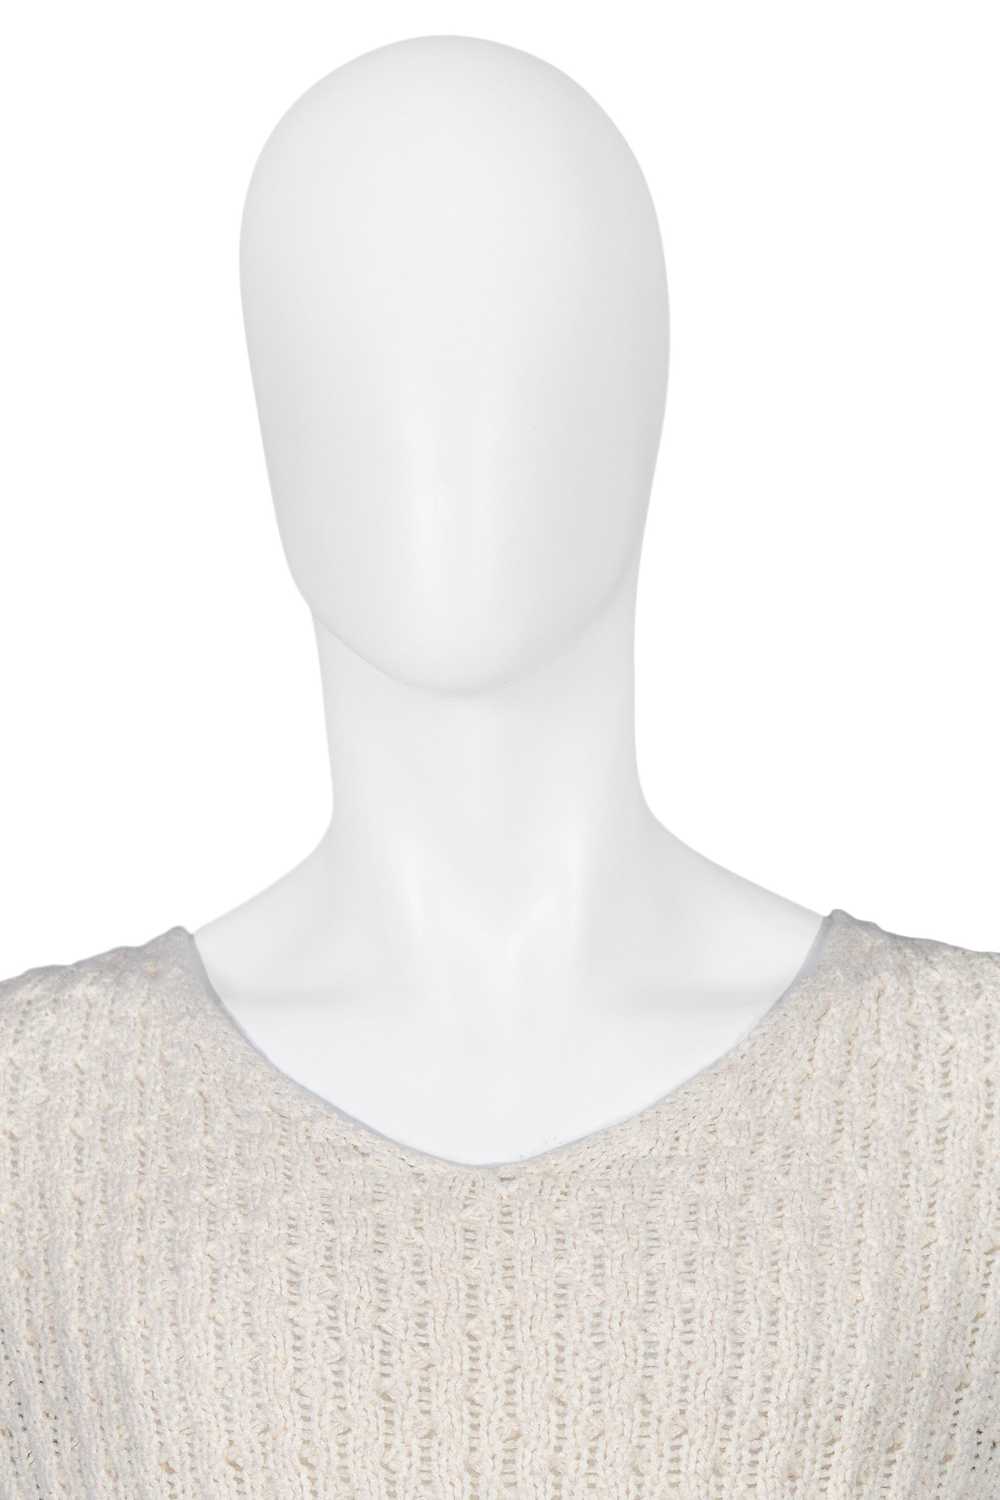 HELMUT LANG OFF WHITE KNIT SWEATER - image 3